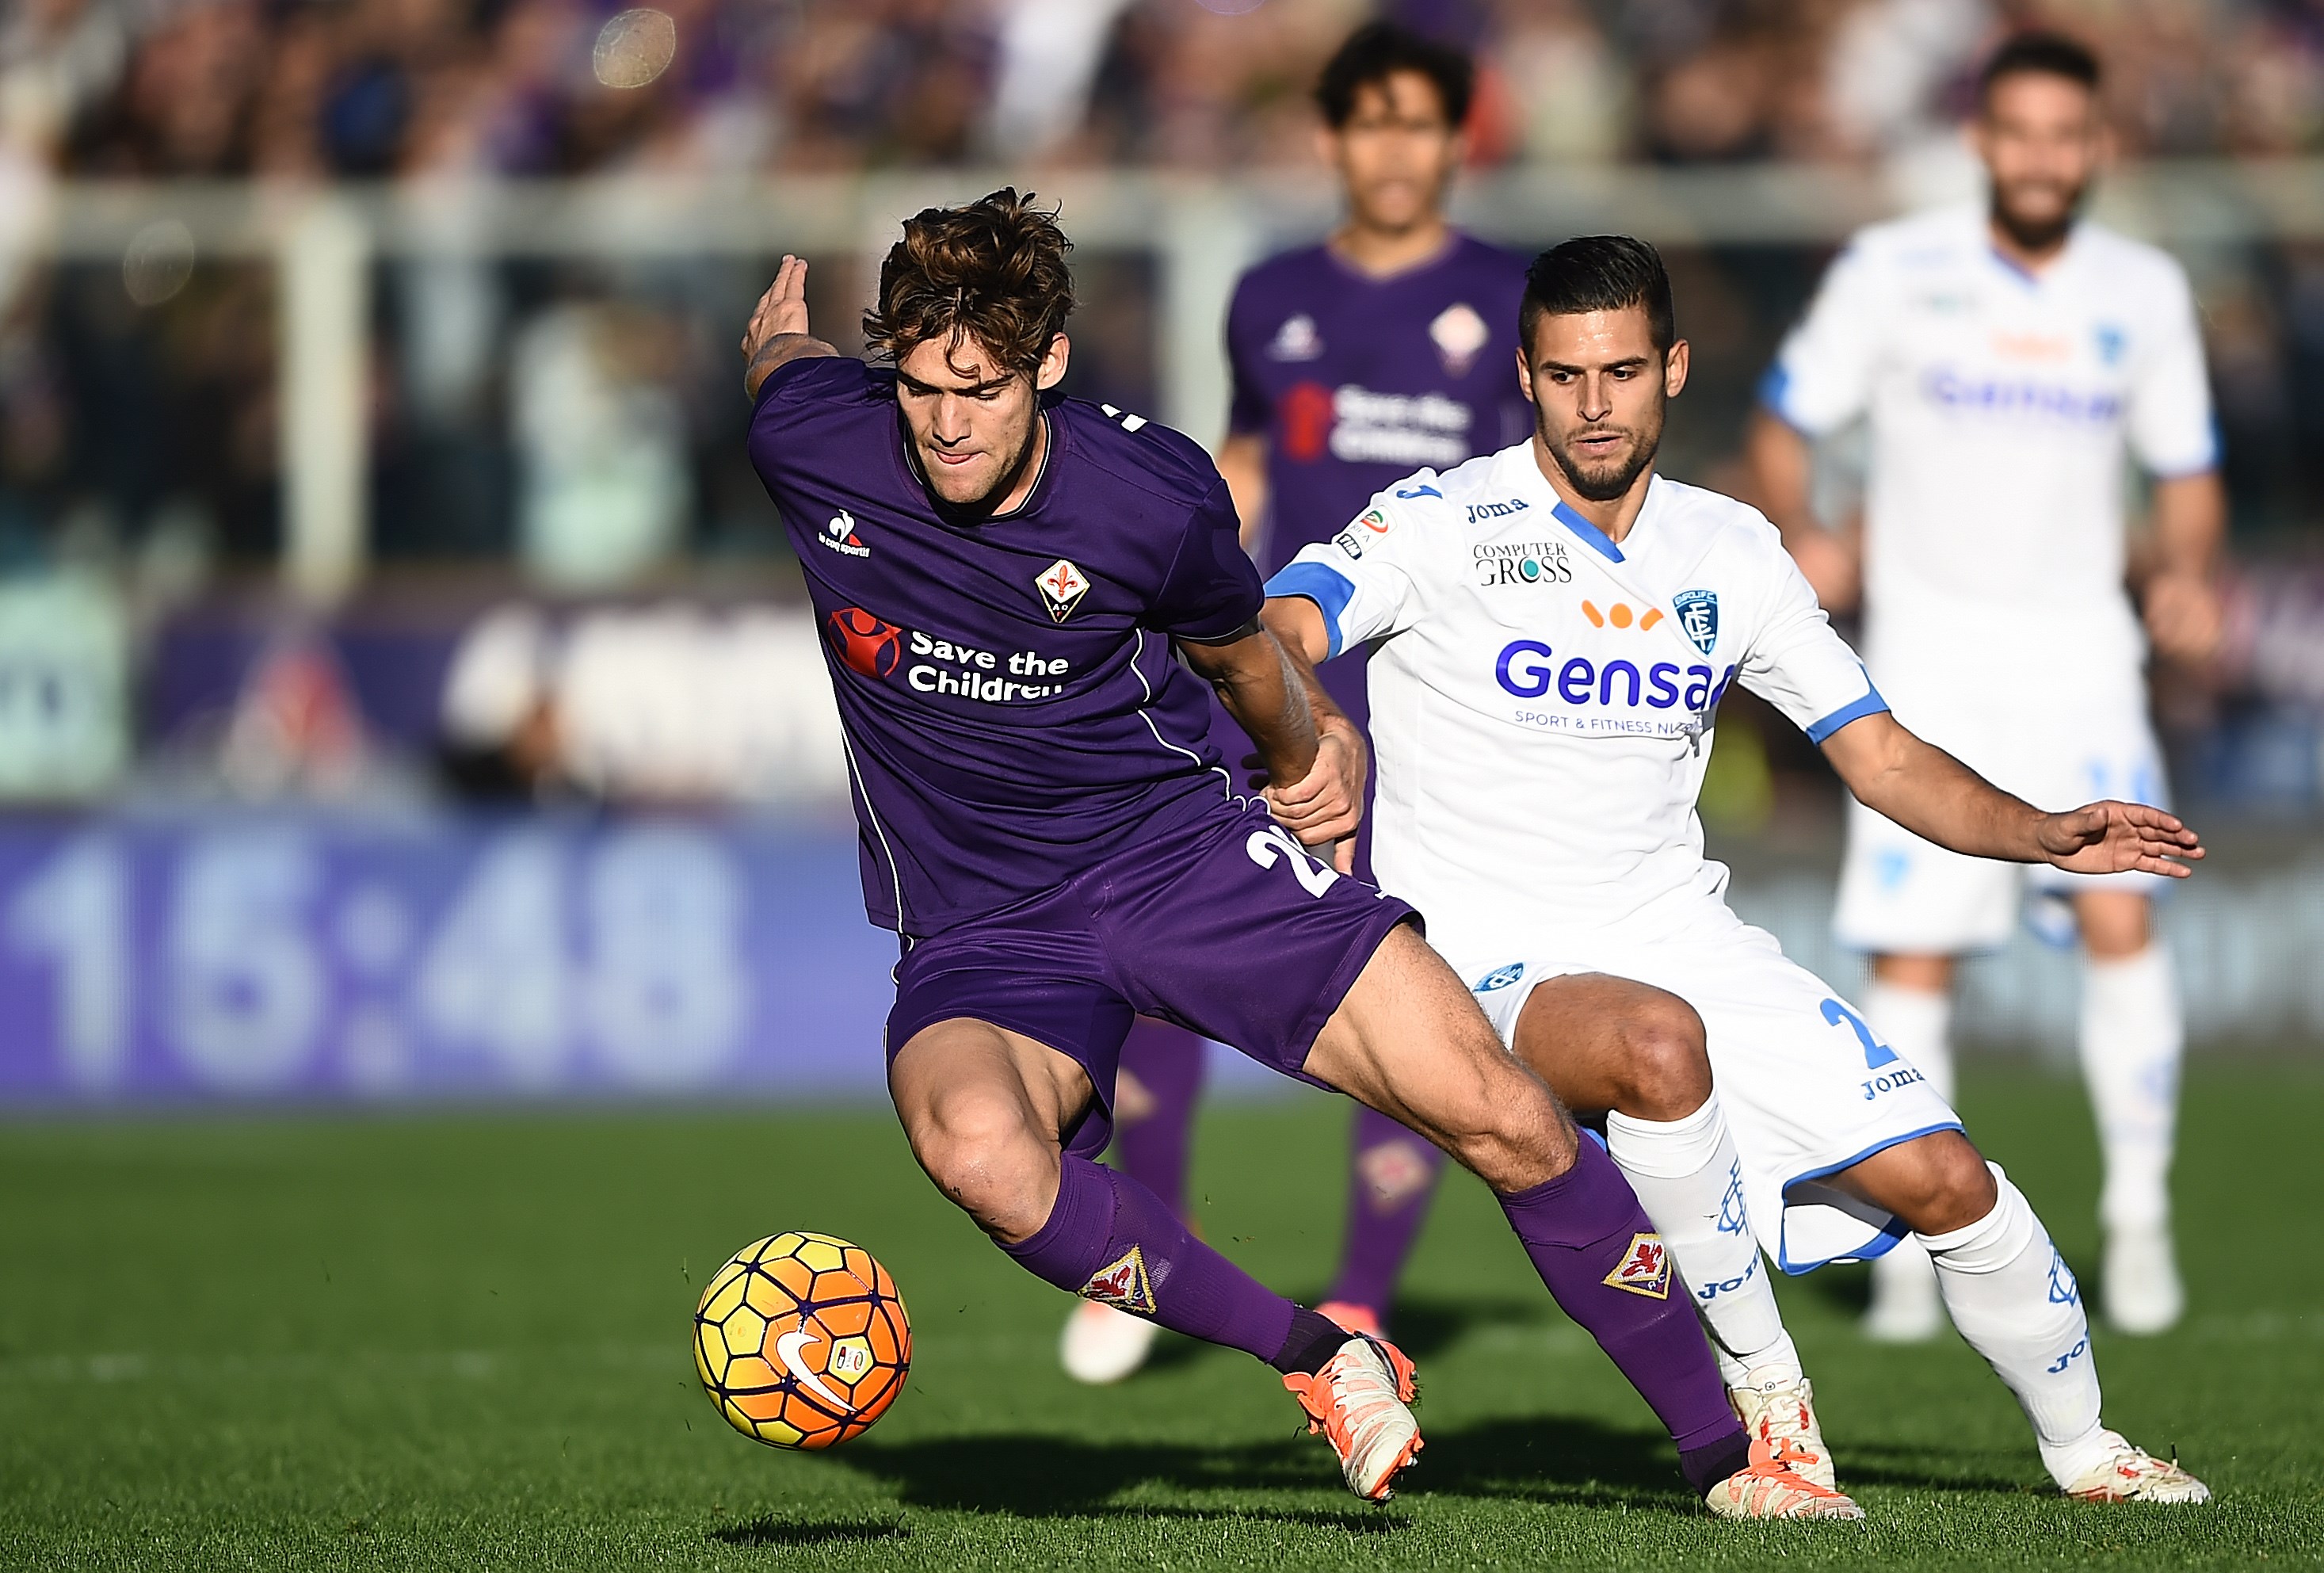 Empoli's defender from France Vincent Laurini vies with Fiorentina's defender from Spain Marcos Alonso Mendoza (L) during the Italian Serie A football match Fiorentina vs Empoli at the Artemio Franchi Stadium on November 22, 2015 in Florence. AFP PHOTO / FILIPPO MONTEFORTE (Photo credit should read FILIPPO MONTEFORTE/AFP/Getty Images)